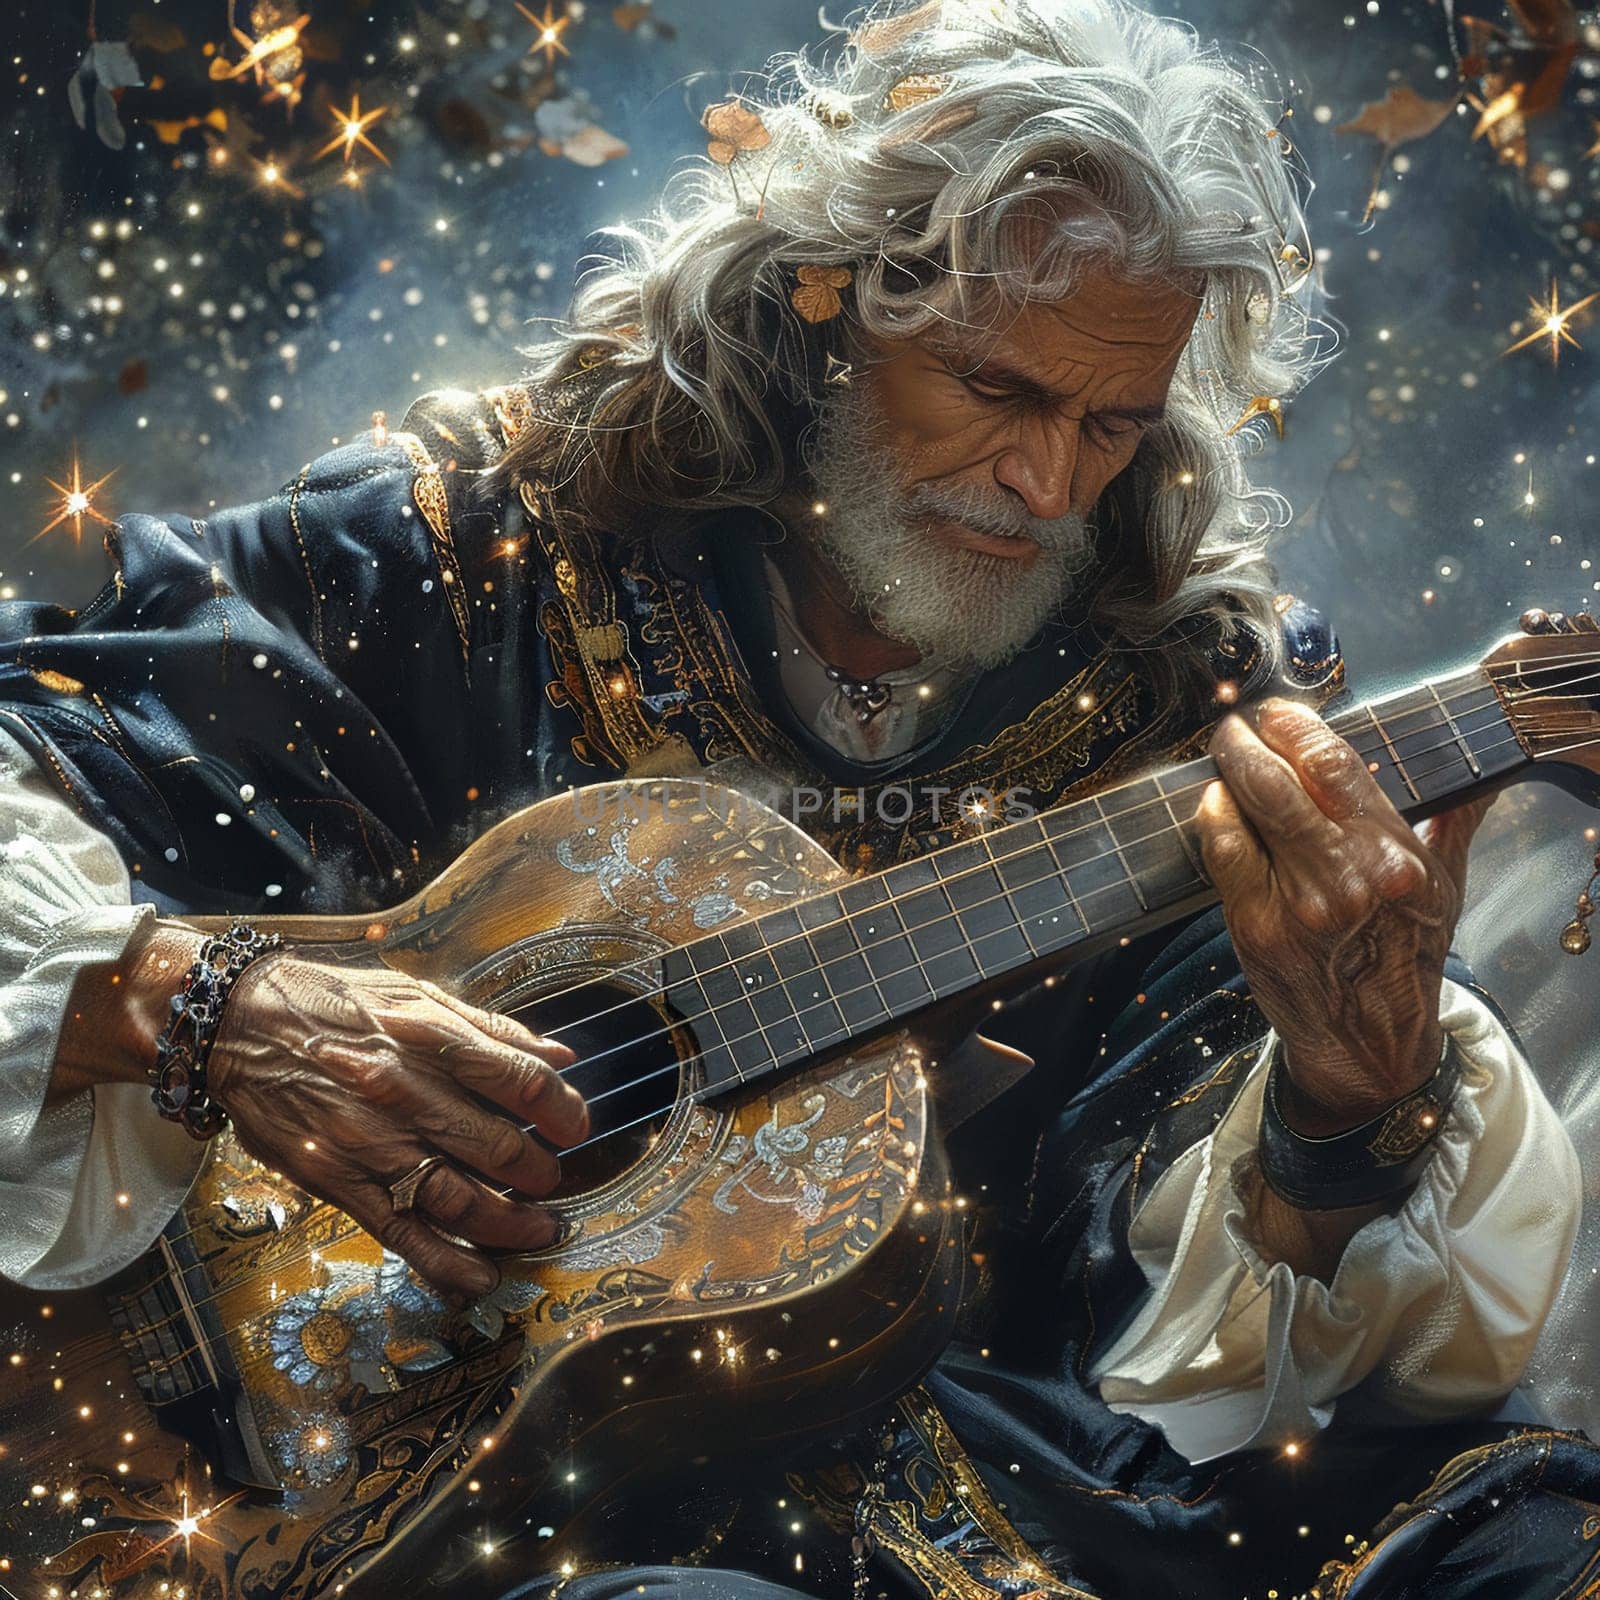 Bard strumming the strings of a starlight lyre, the melody a constellation of sound.